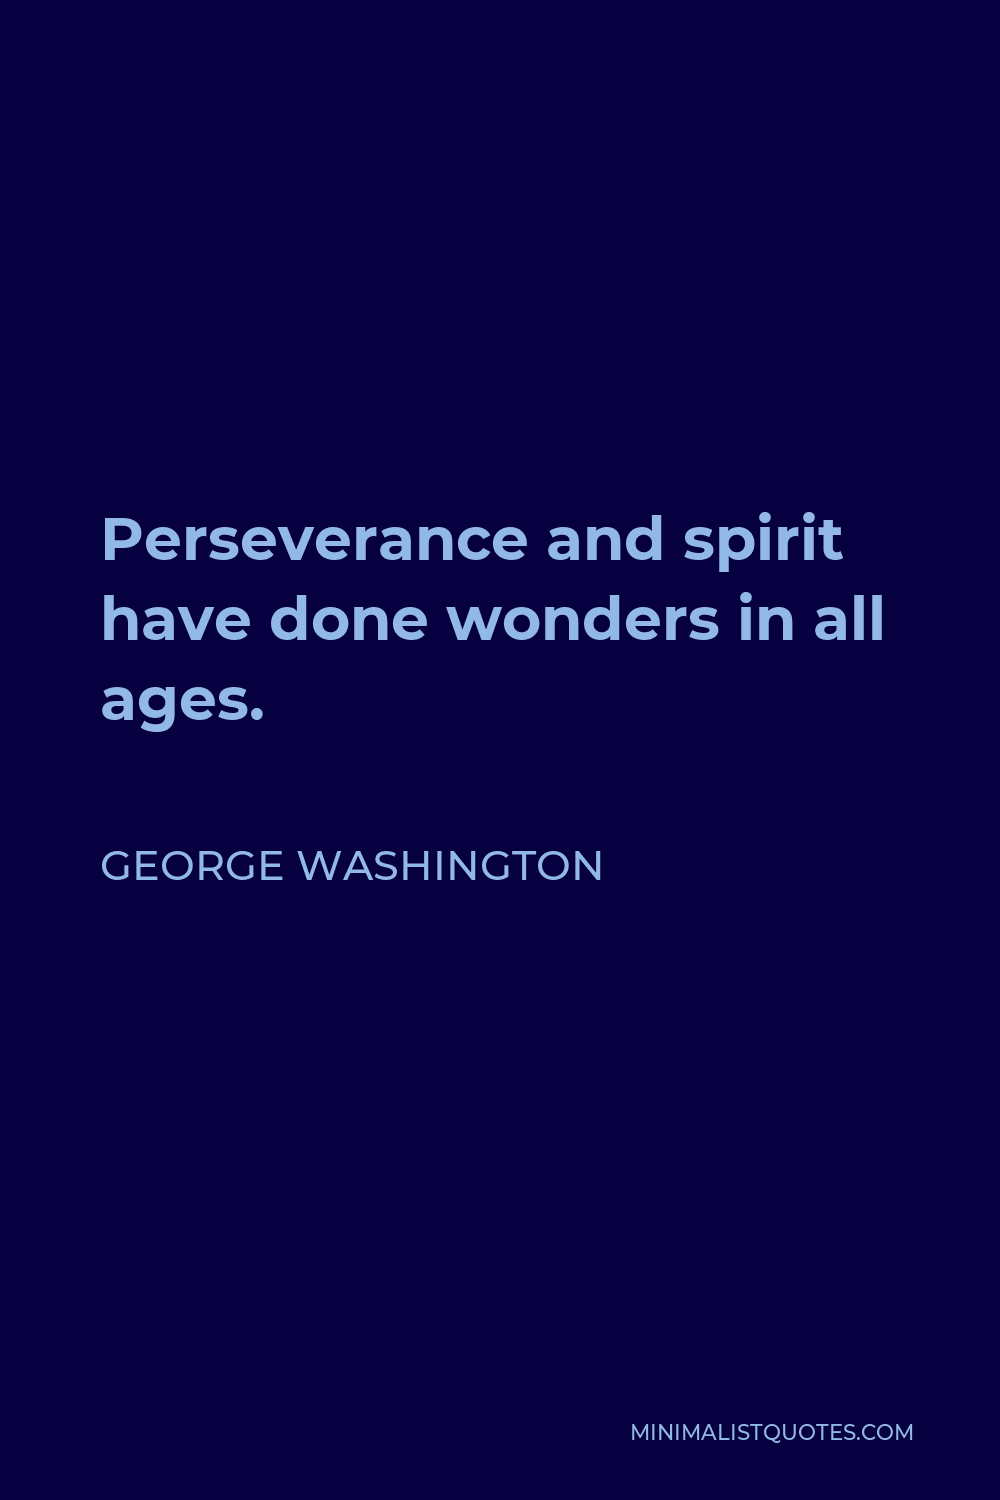 George Washington Quote - Perseverance and spirit have done wonders in all ages.